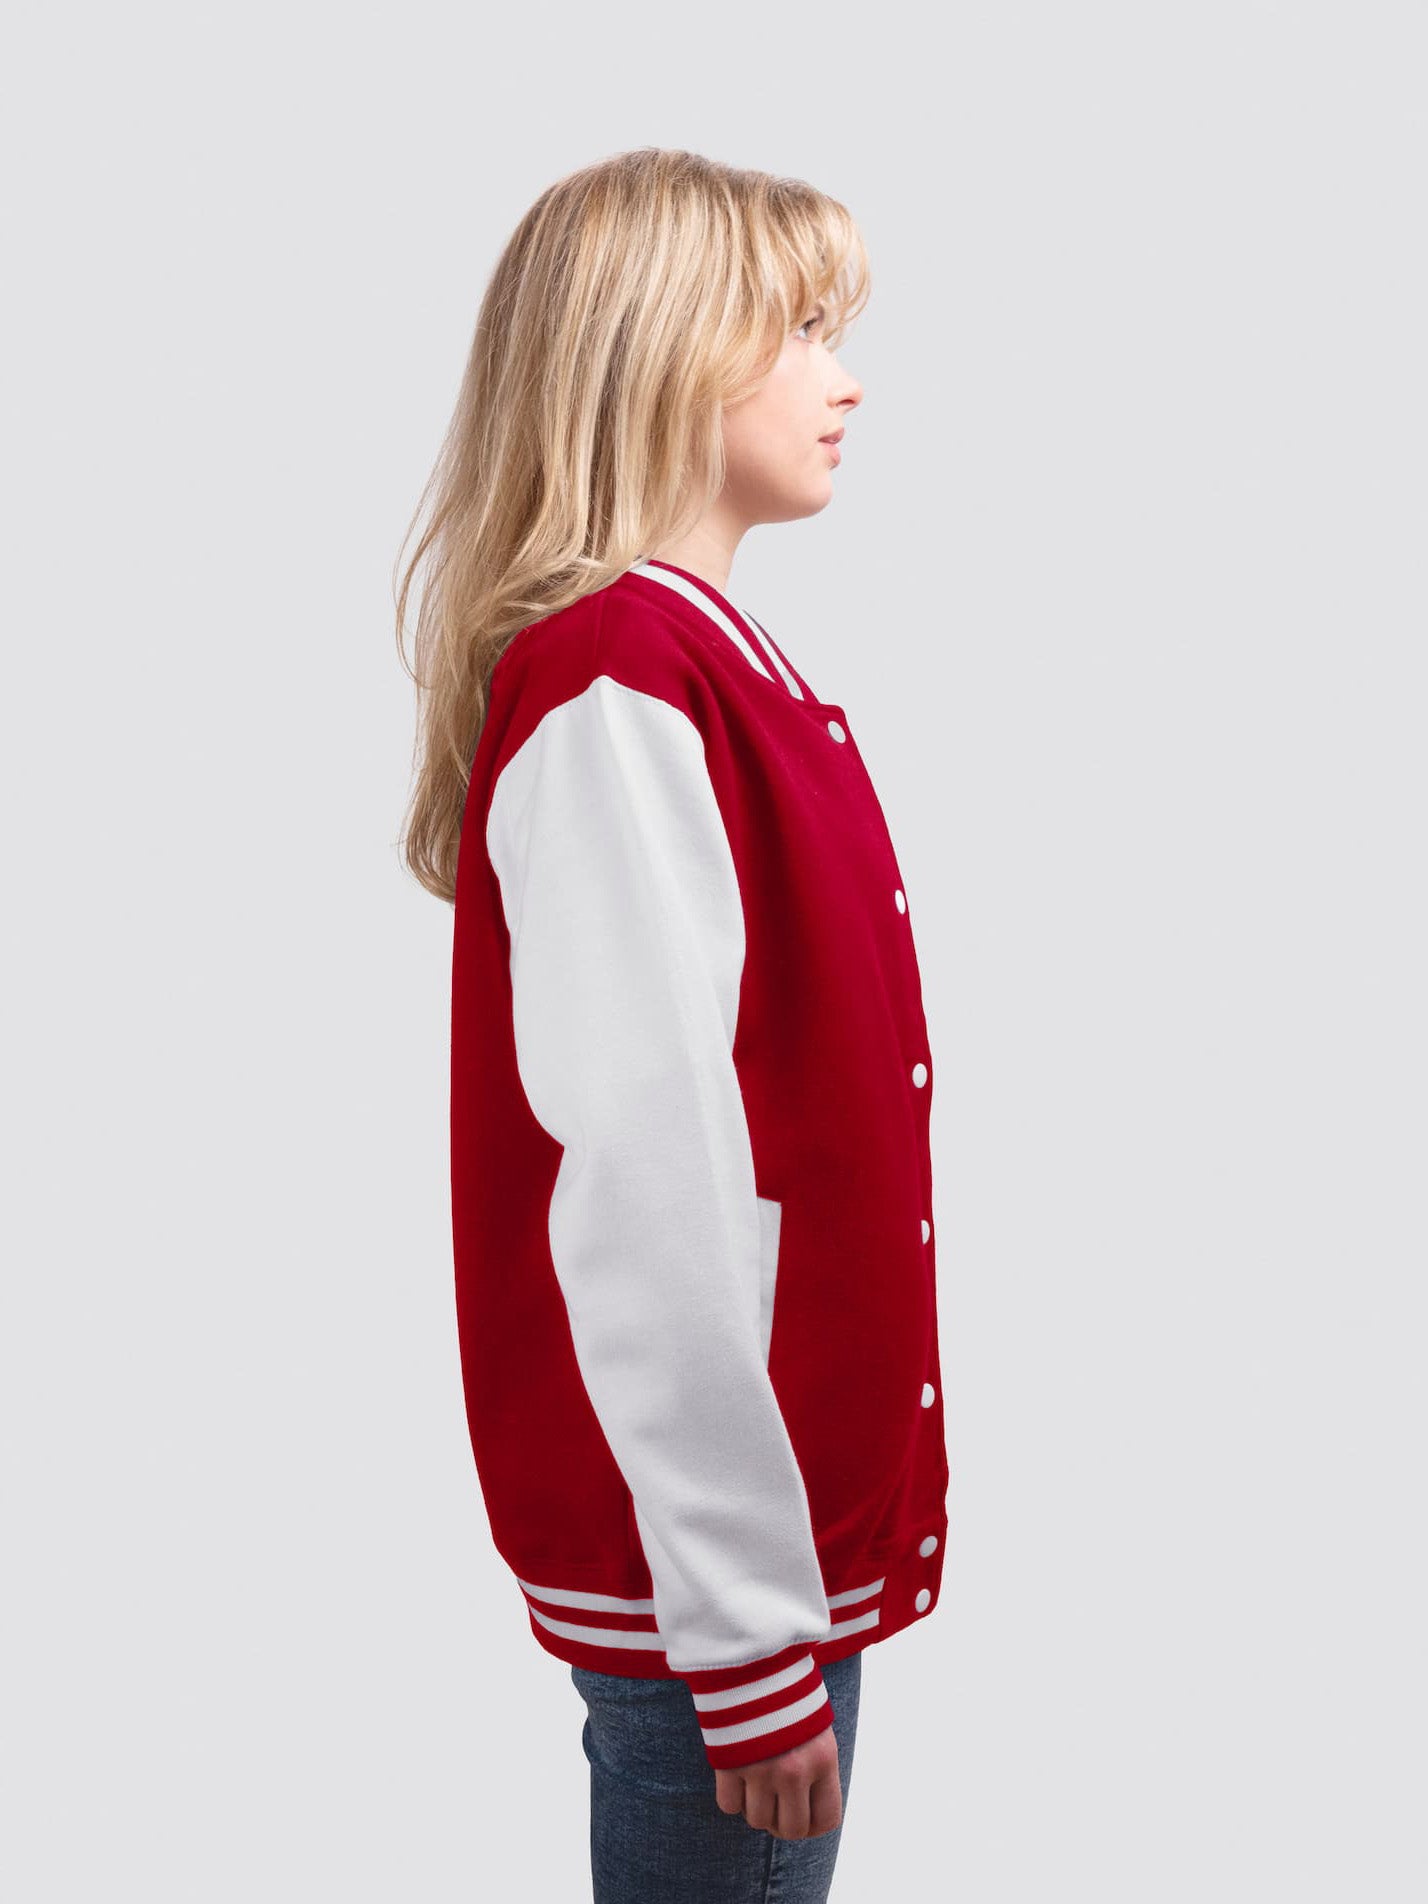 Fire red vintage bomber jacket, from Redbird Apparel